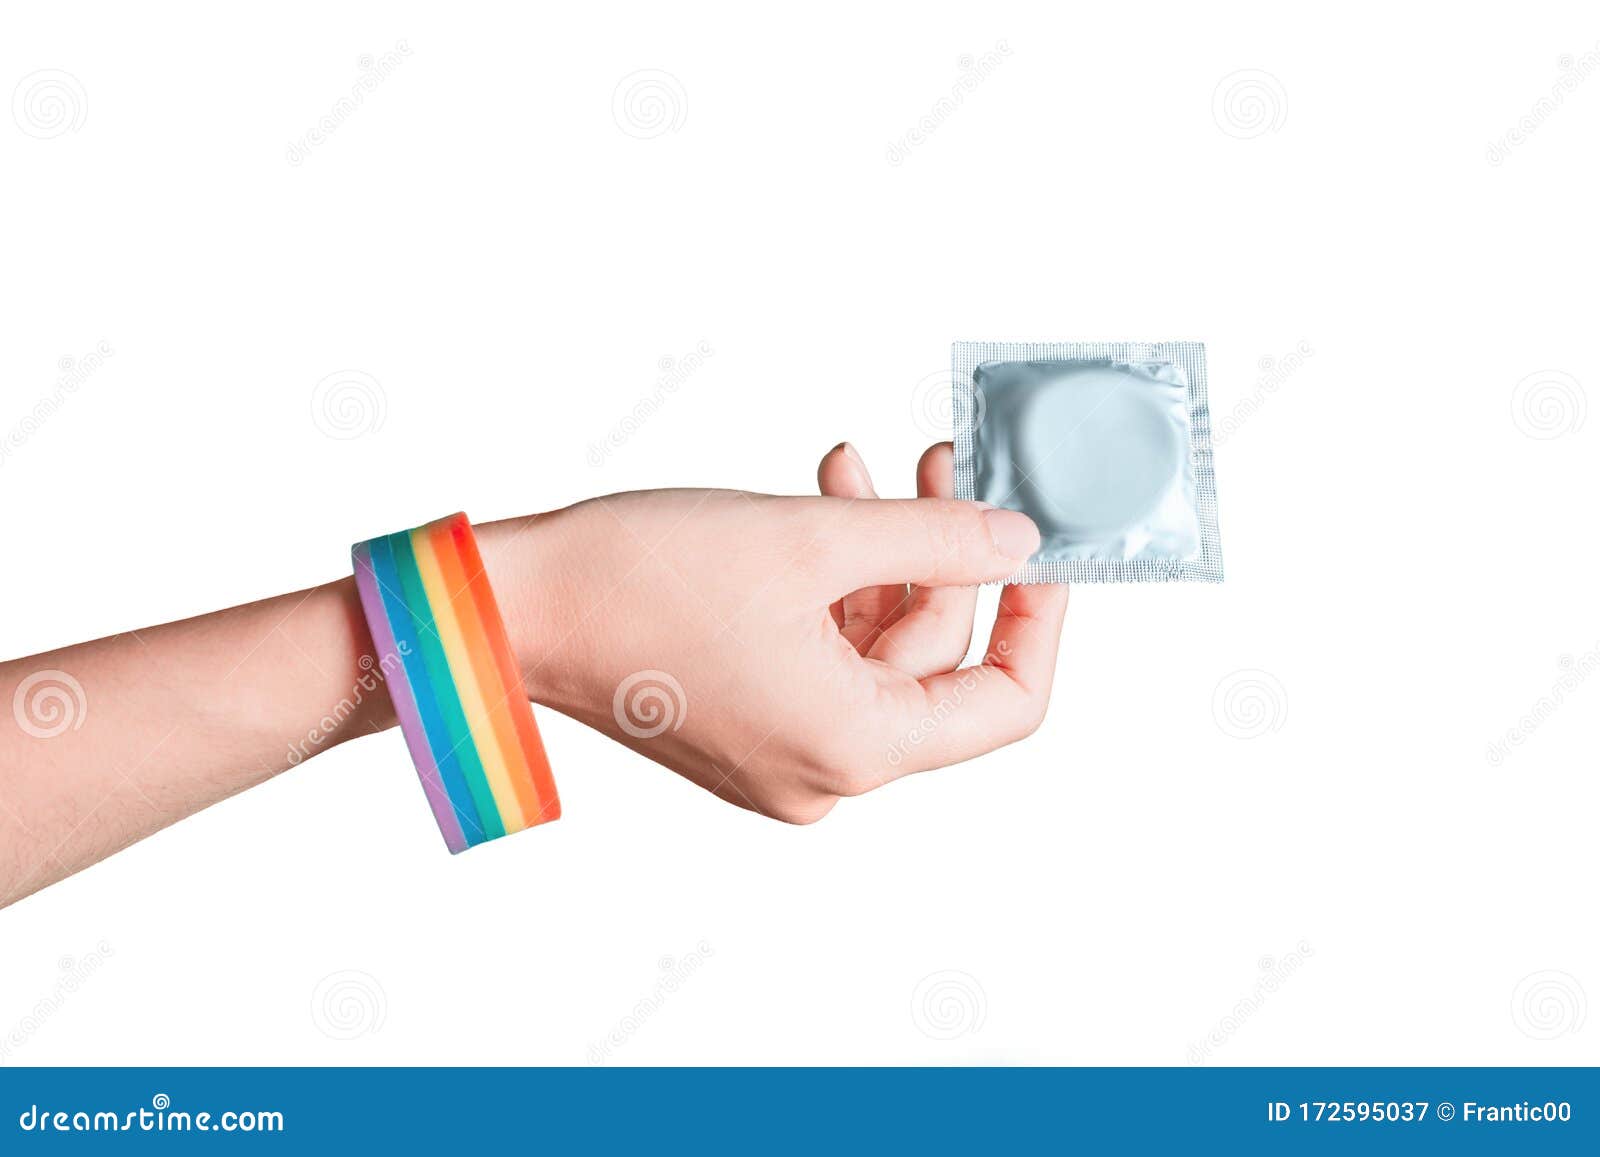 Hand with LGBT Bracelet Holding a Condom Stock Image pic